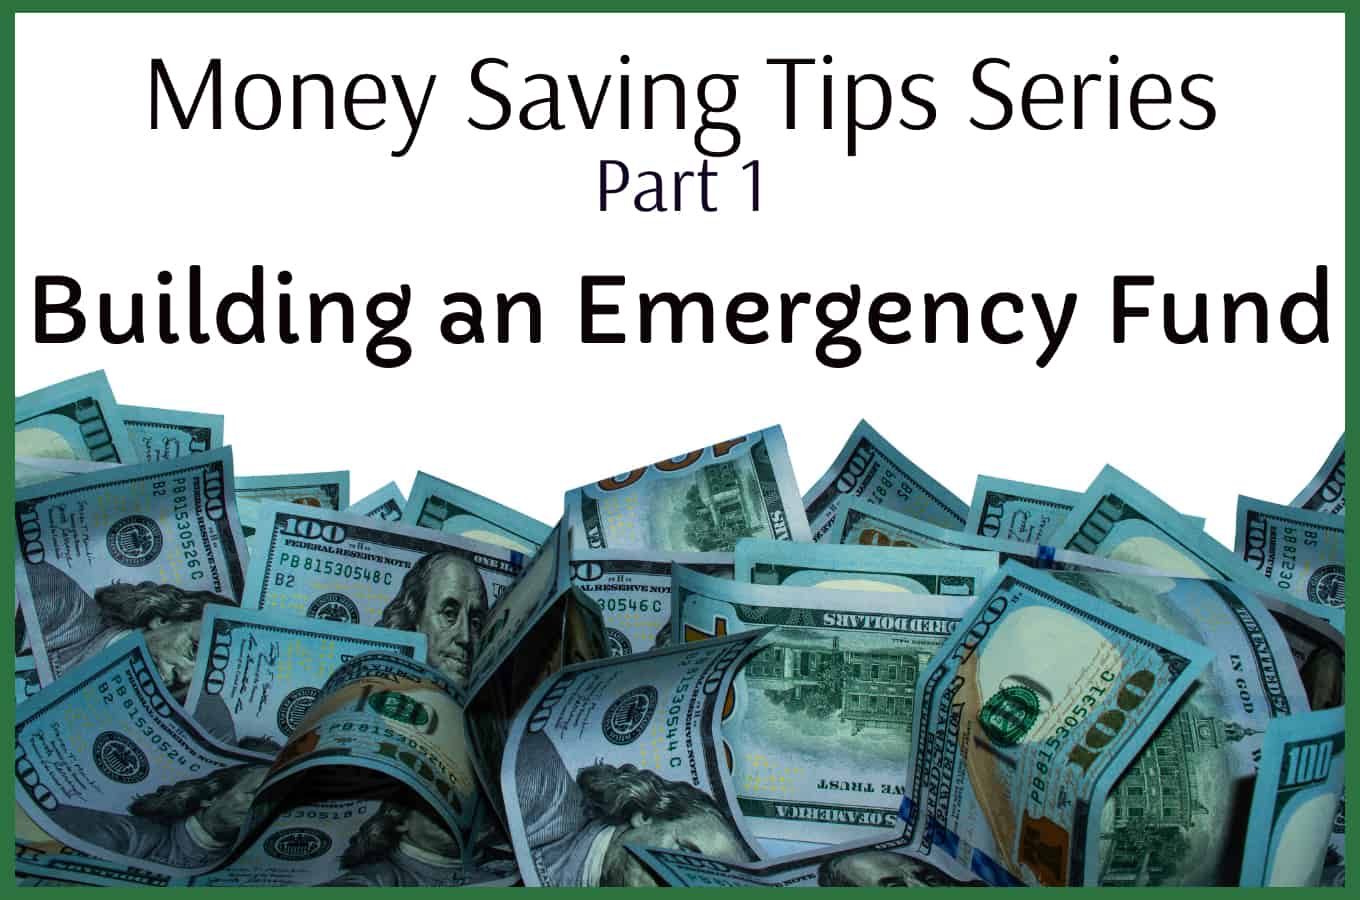 Monthly Money Saving Tips: Easy Ways to Save Money Each Month